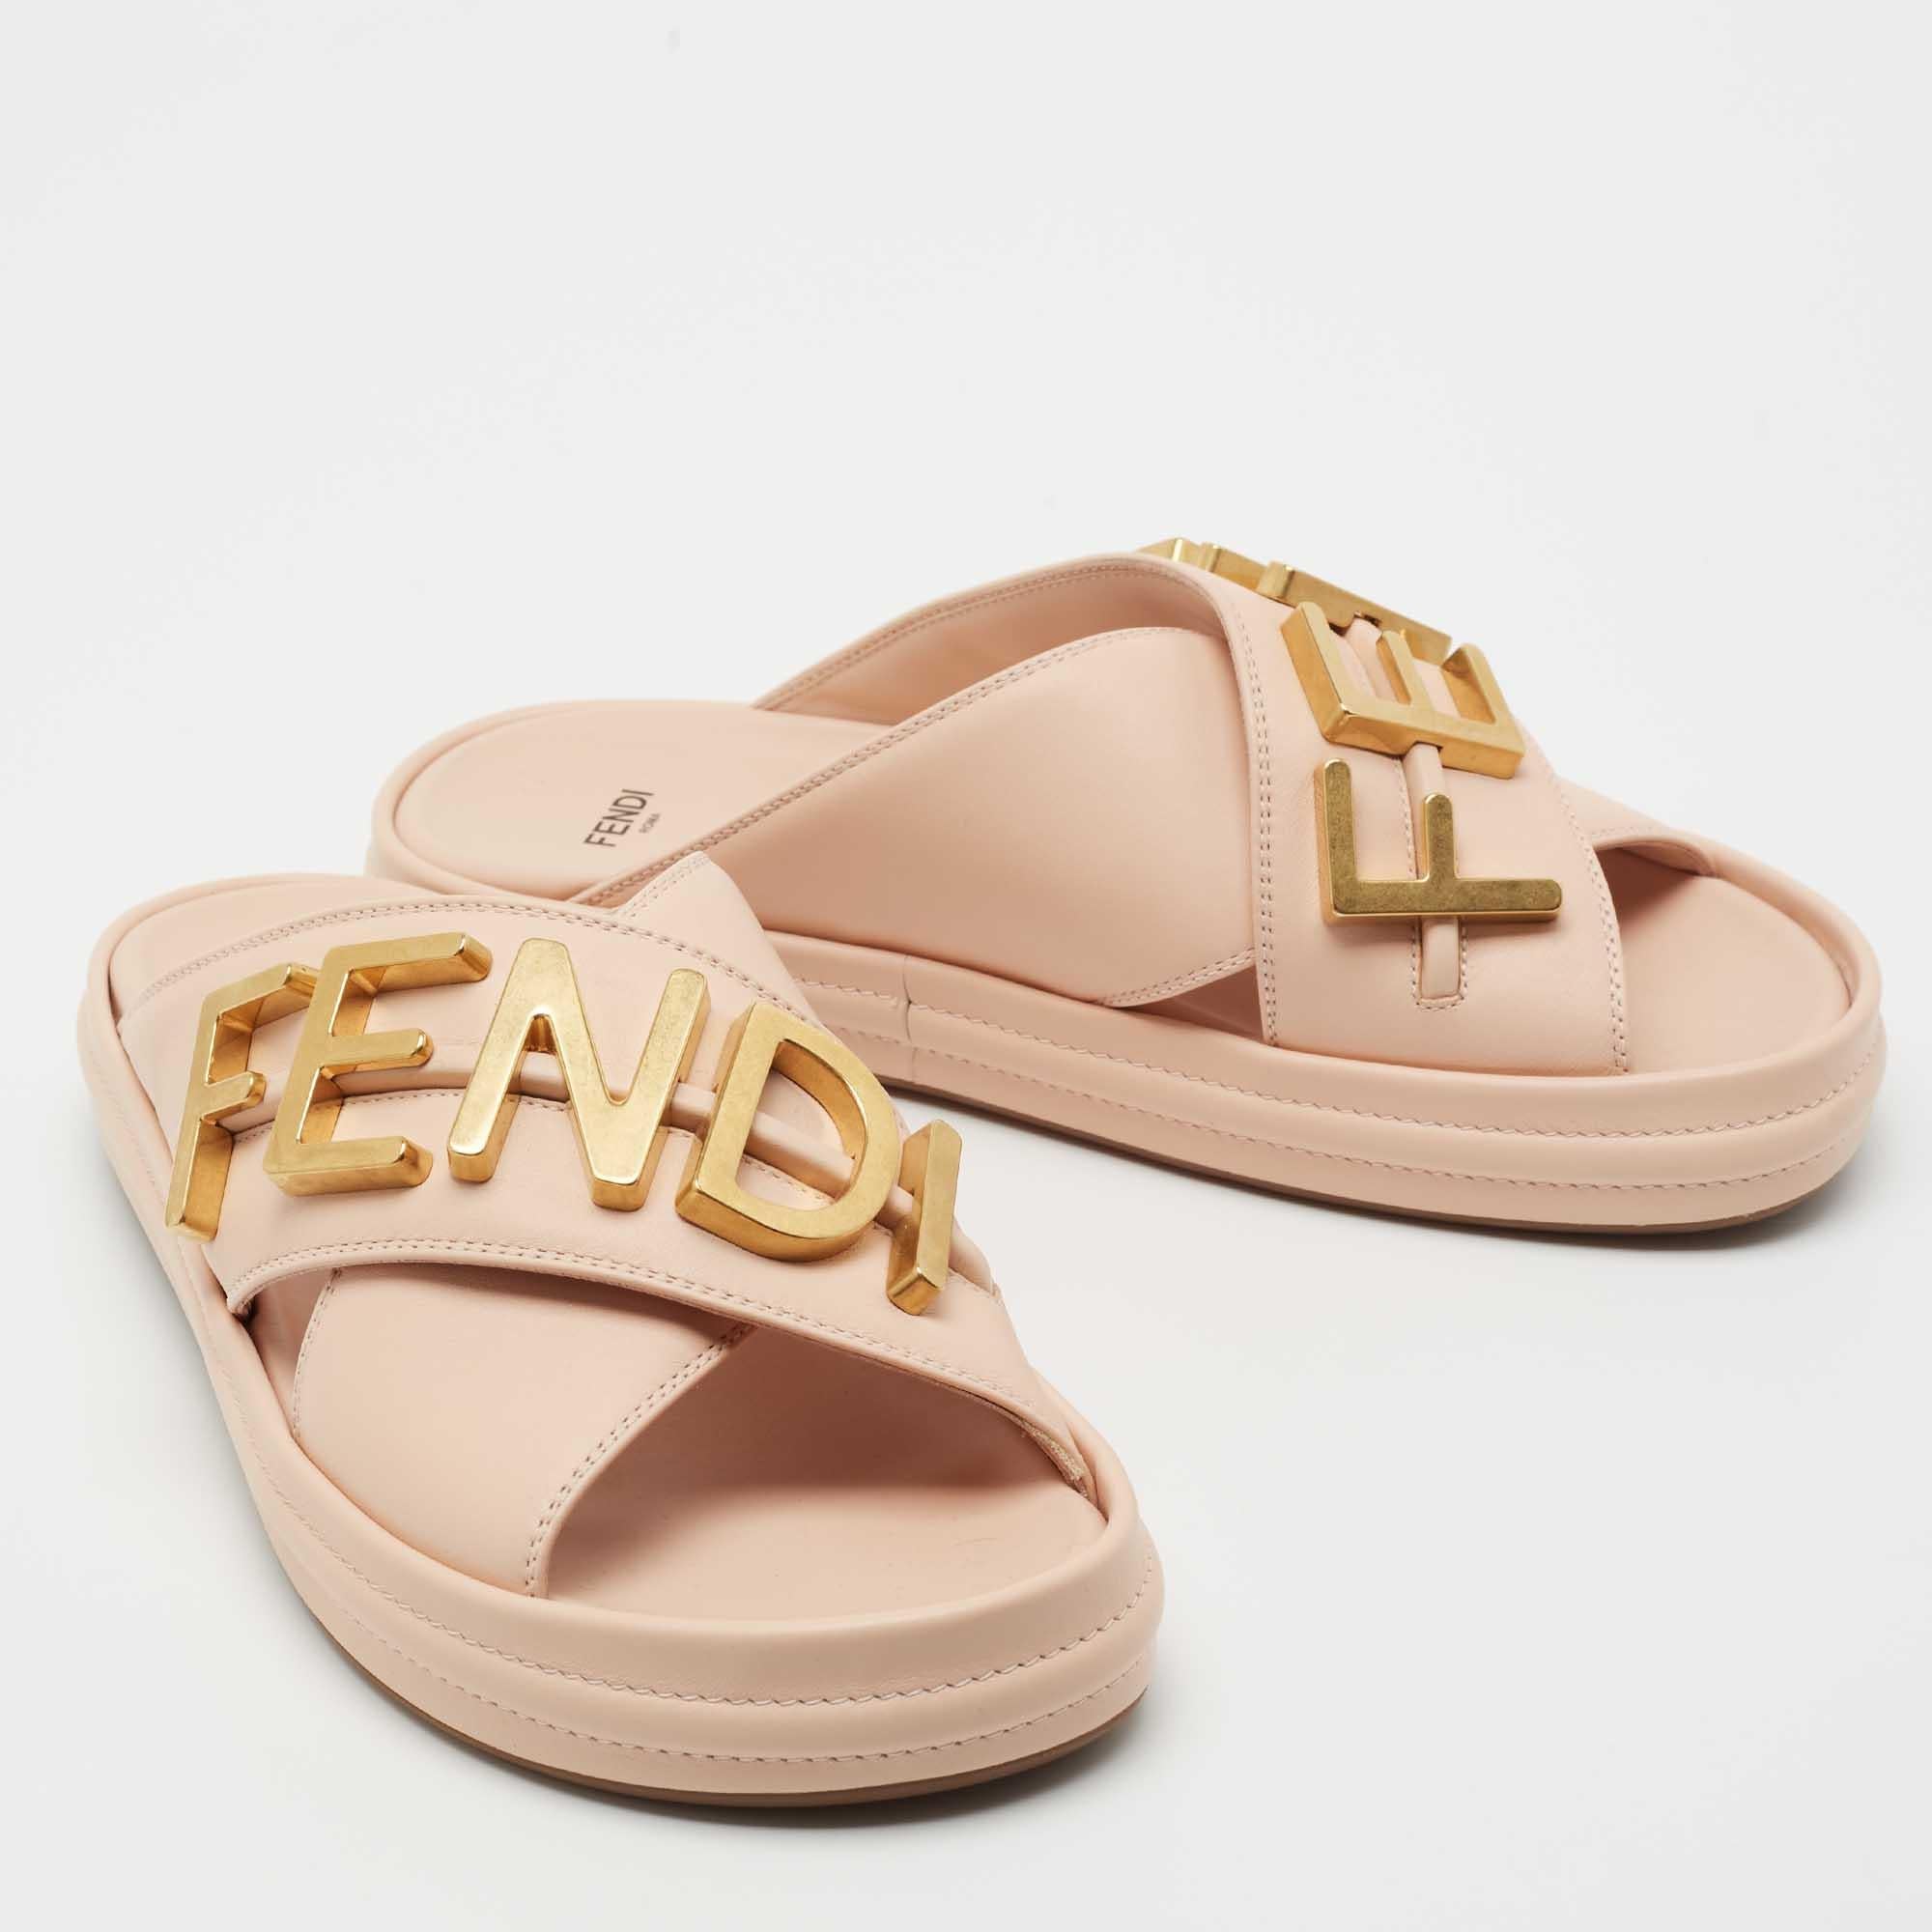 The bold lettering of 'FENDI' is balanced by leather in classy pink thus achieving a clean, put-together design you will wear for a long time. They have wide crossover straps and rubber soles.

